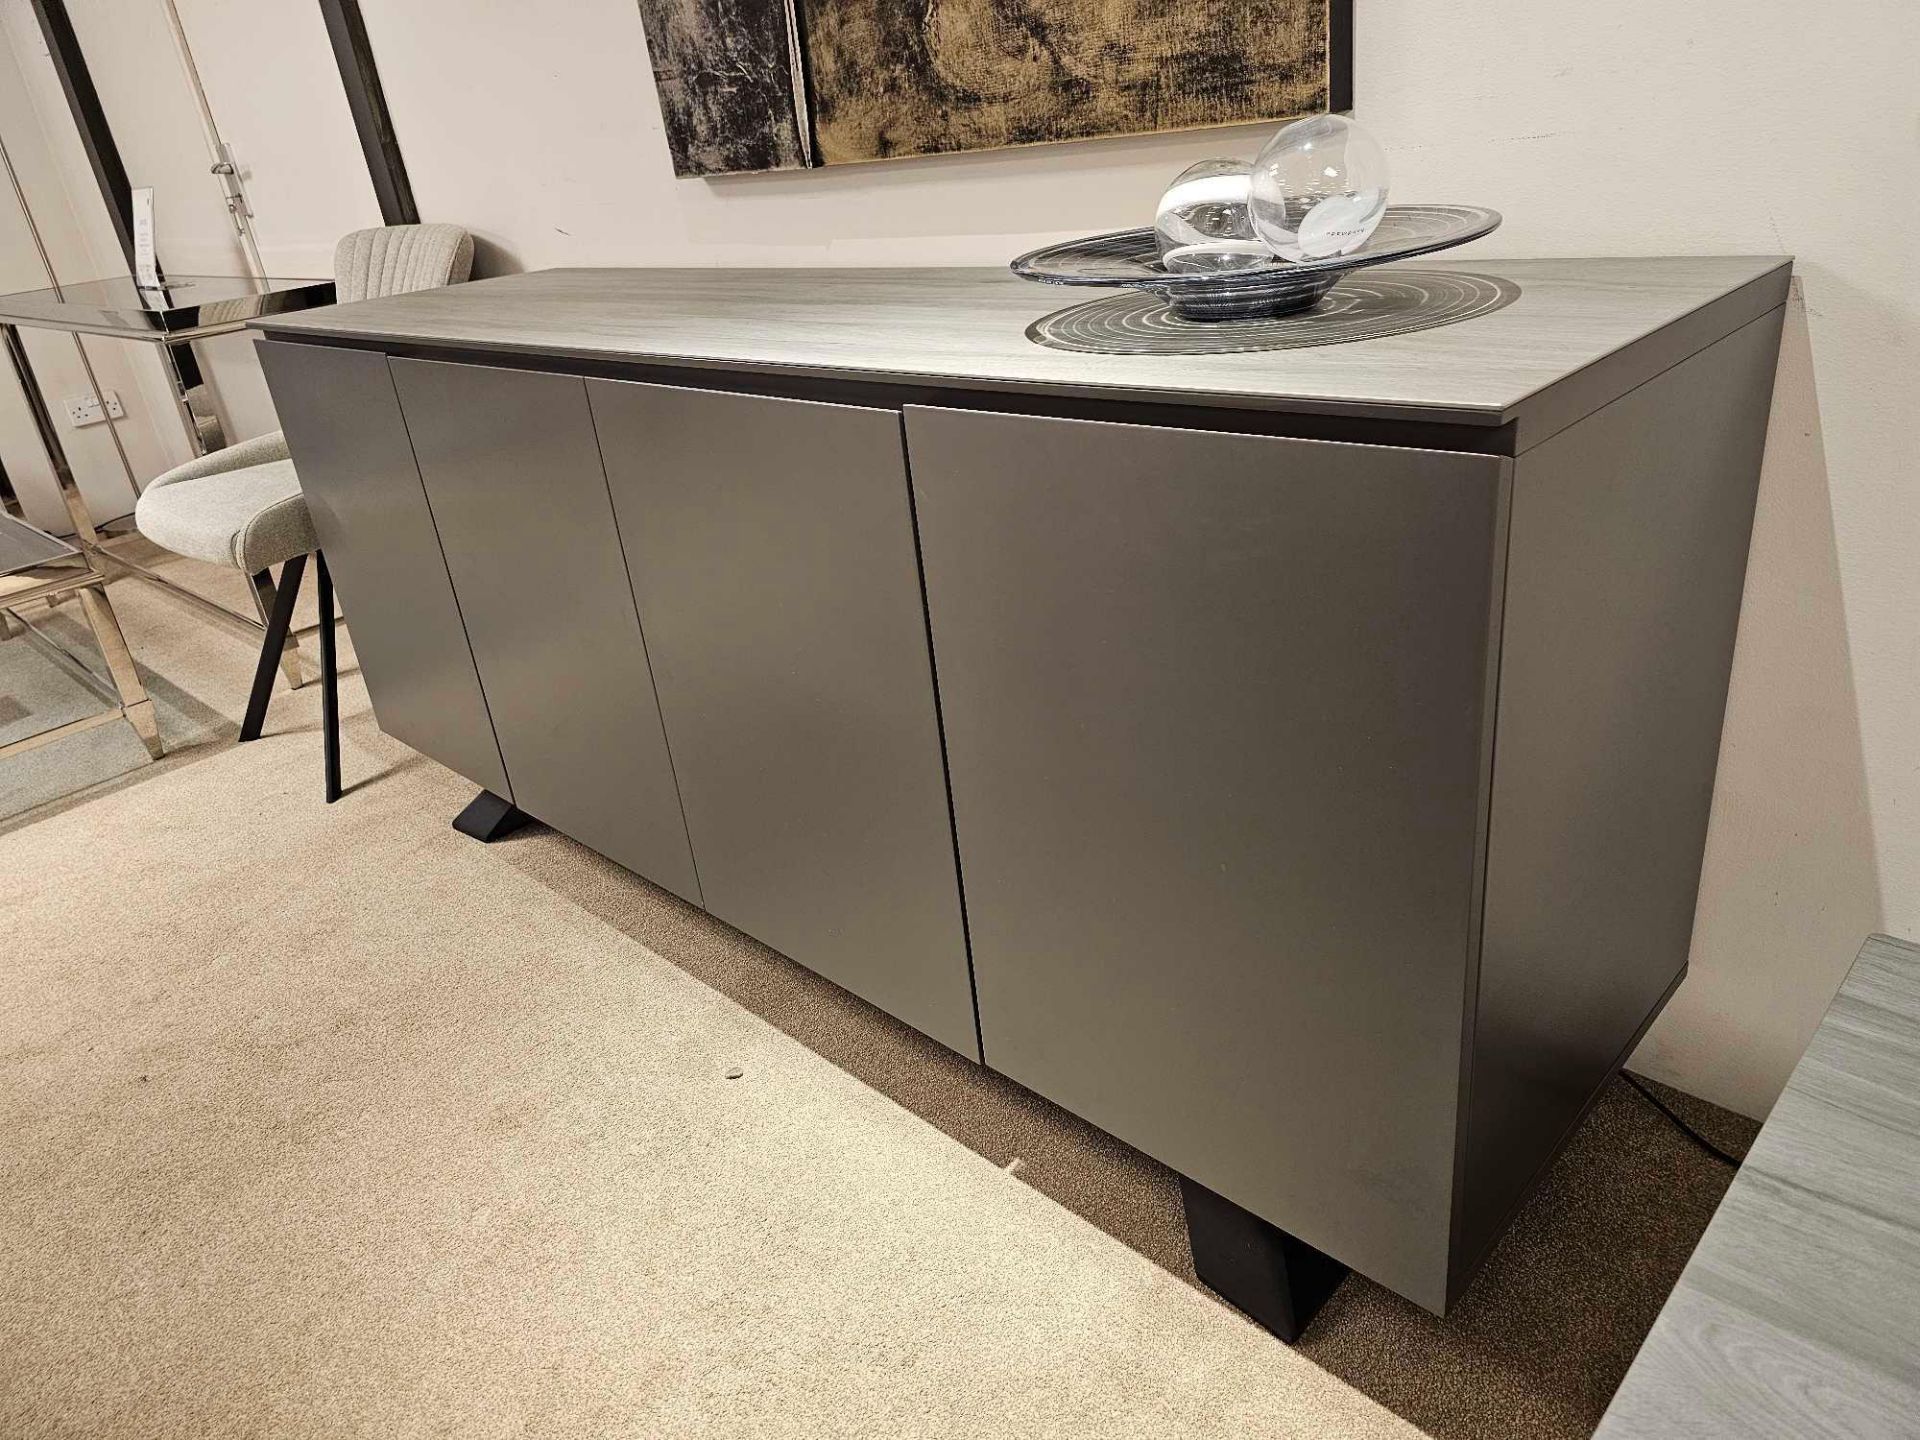 Spartan Sideboard by Kesterport The Spartan Four Door Sideboard provides is striking as a stand - Image 3 of 12